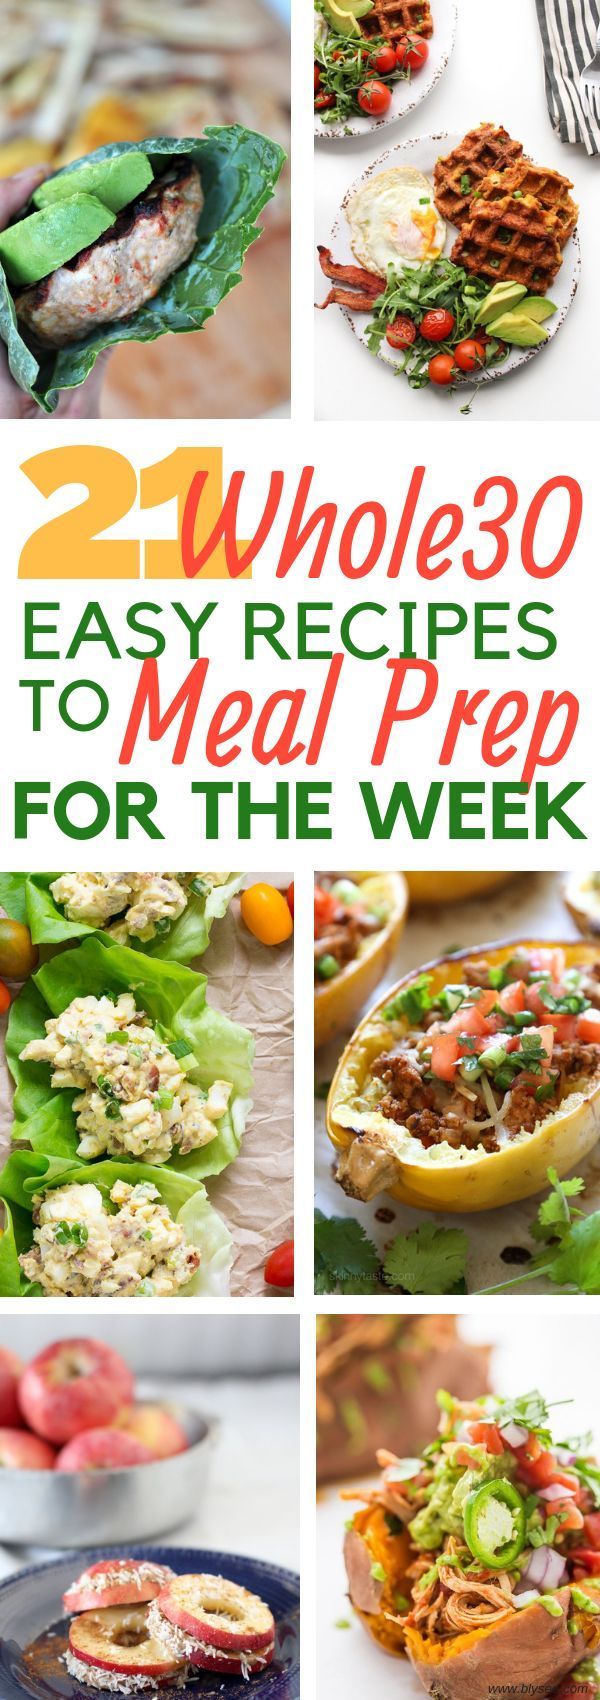 21 Easy Whole30 Recipes You Can Meal Prep For The Week -   24 whole 30 rules
 ideas